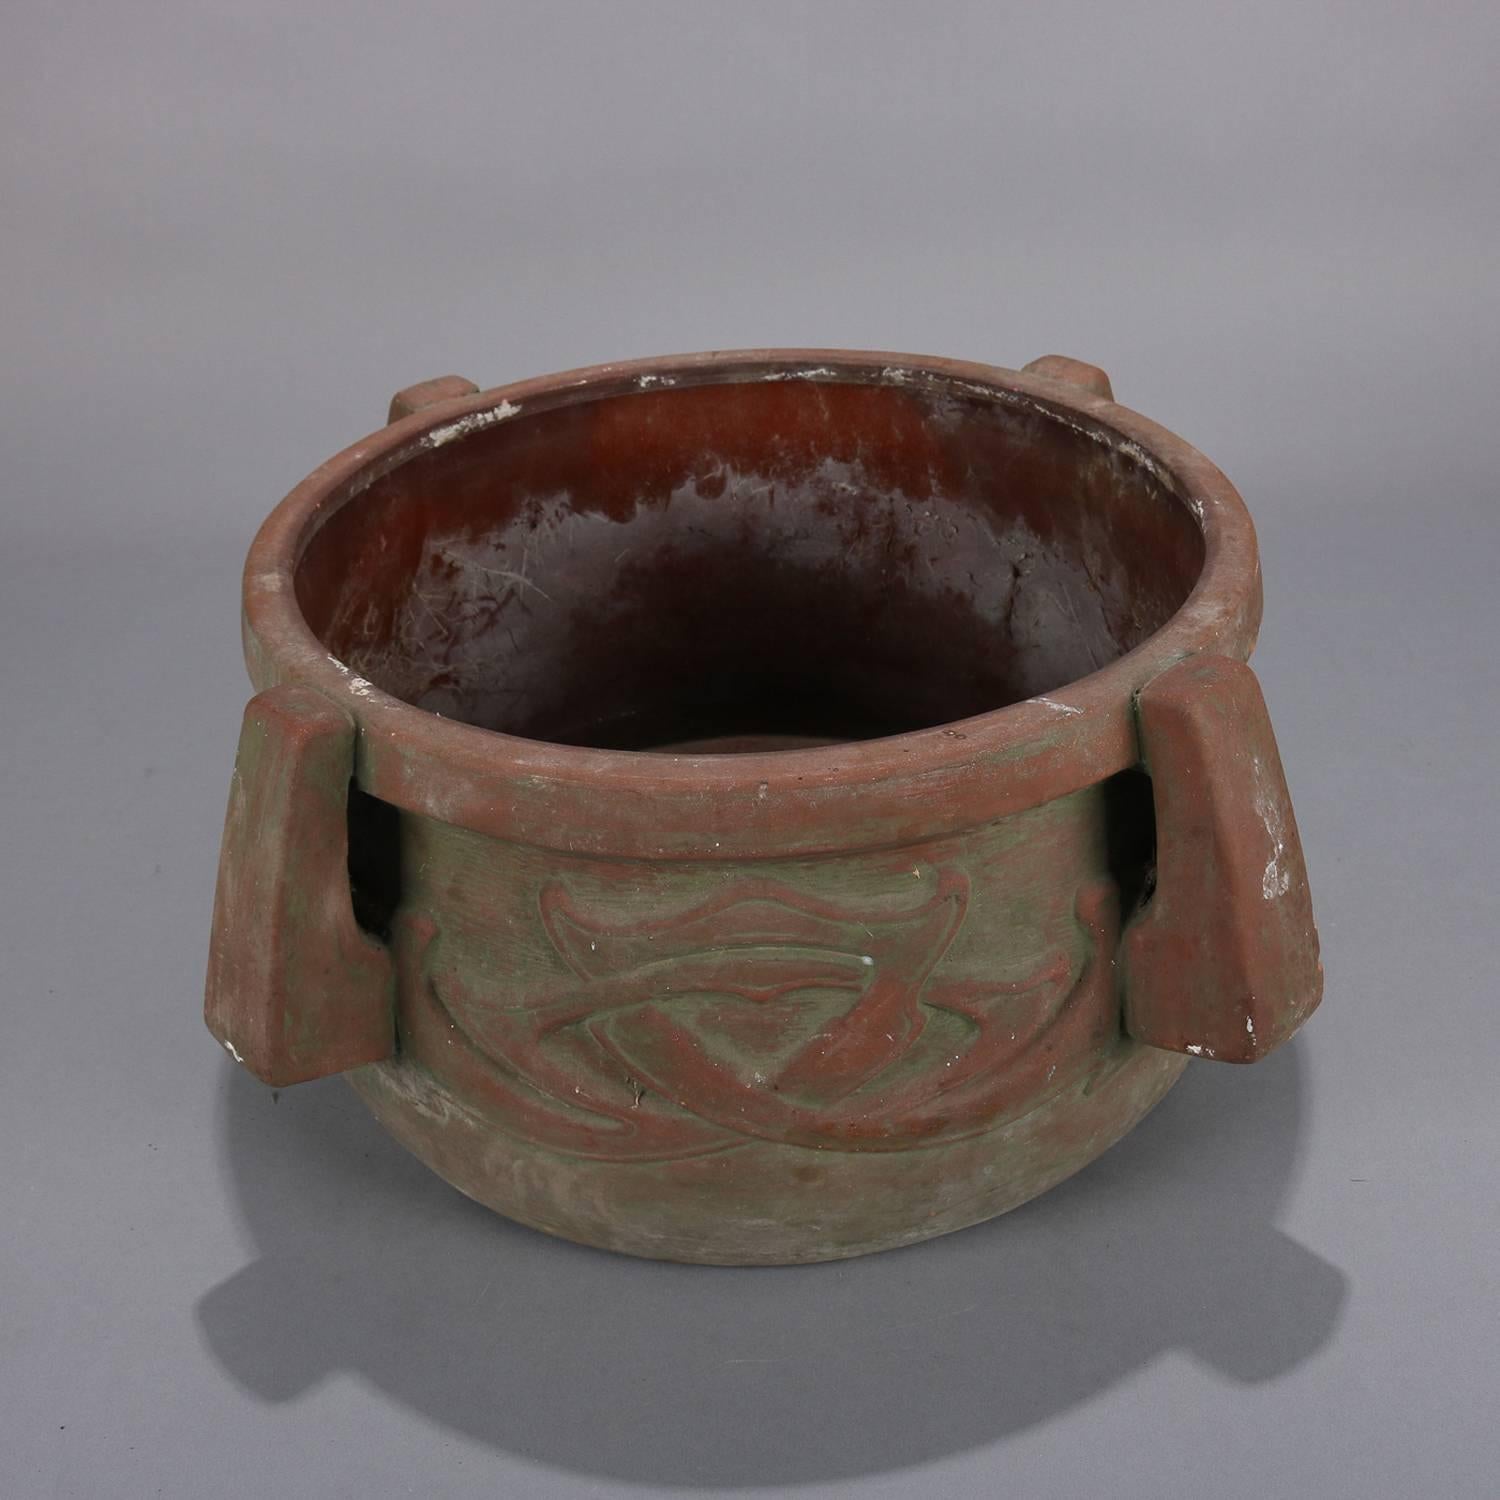 Arts & Crafts terracotta planter features high relief abstract decoration with four handles, circa 1910

Measures: 9